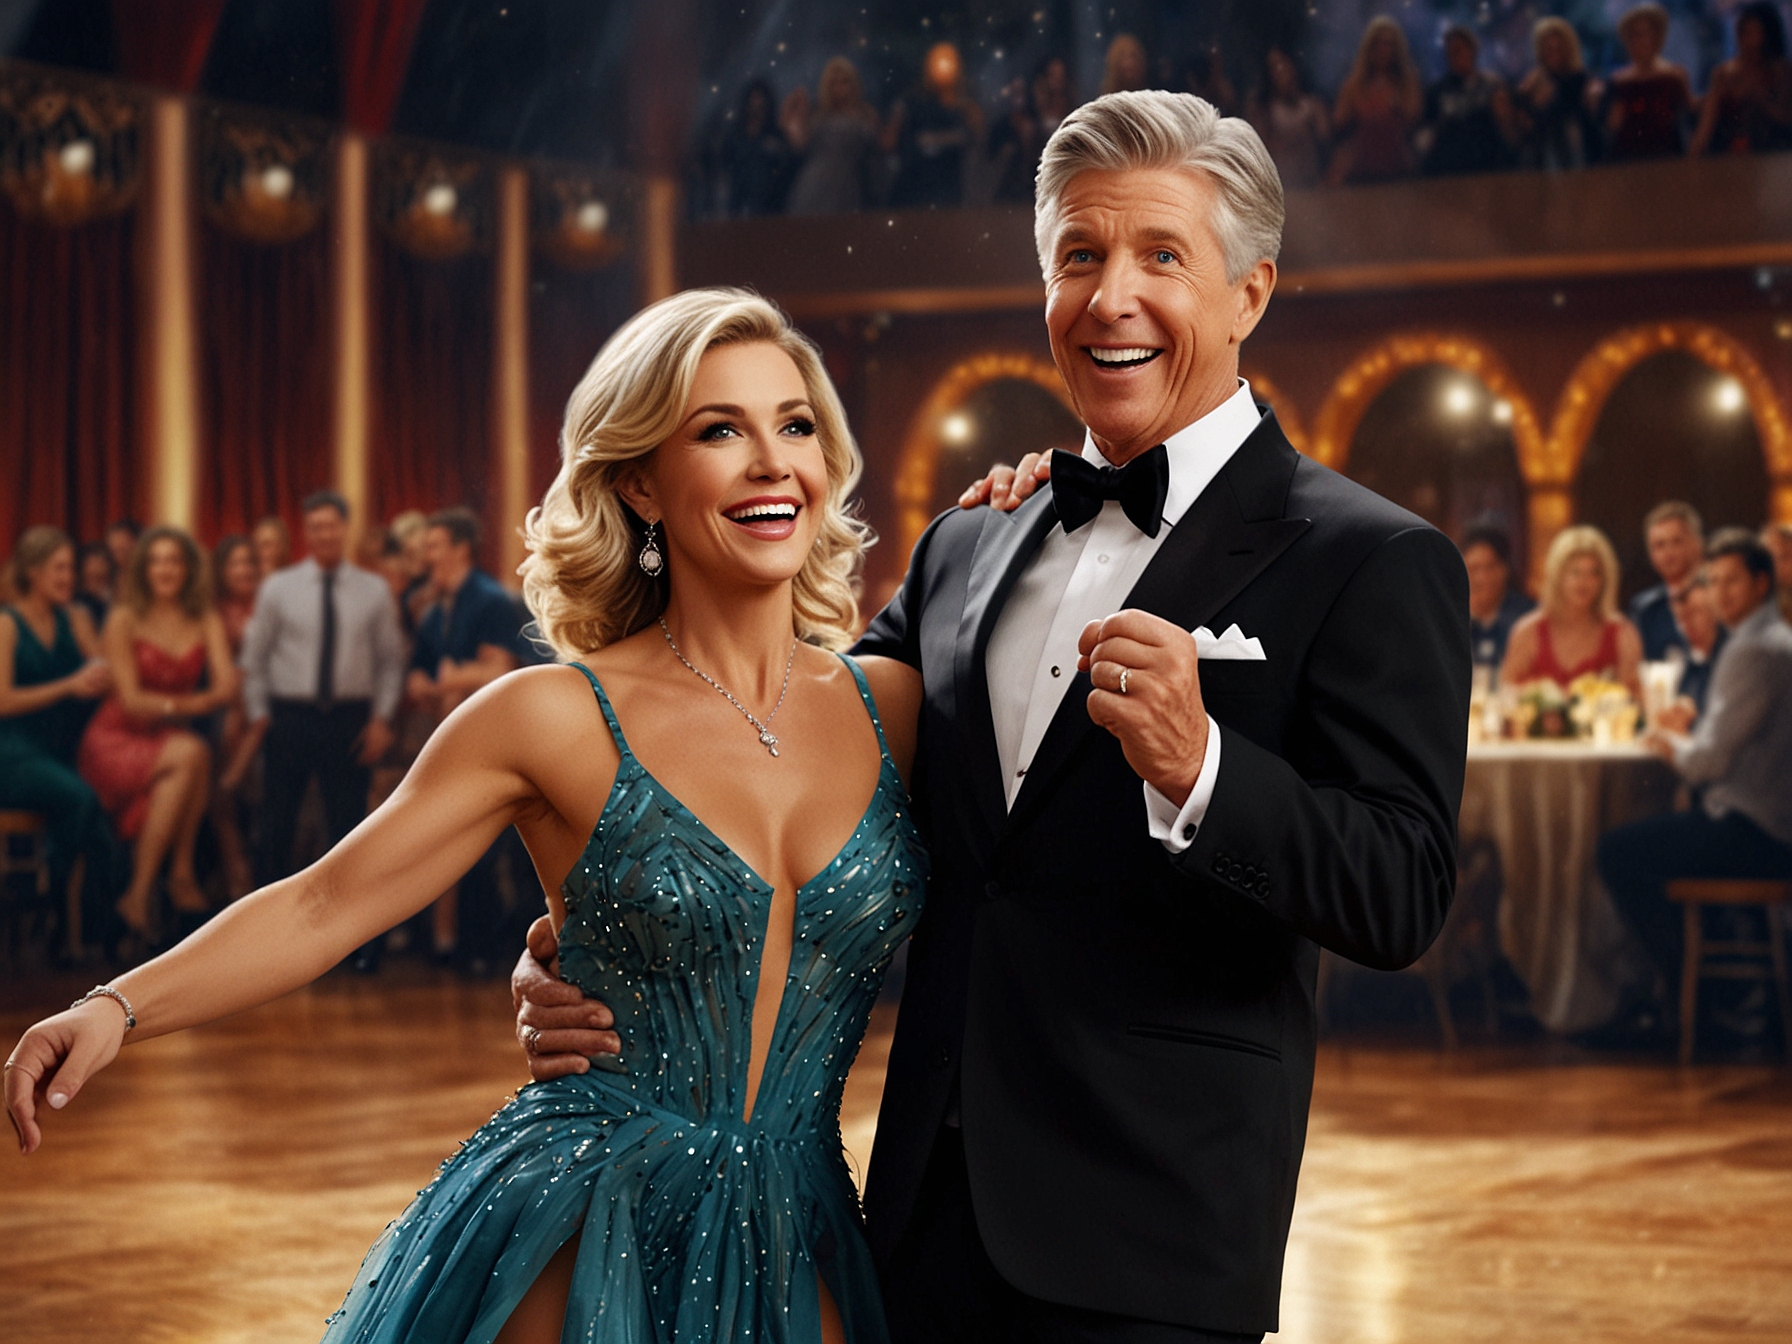 A nostalgic scene from DWTS, showing Tom Bergeron on stage, engaging in lighthearted banter with contestants and co-hosts amidst the glitzy ballroom setting.